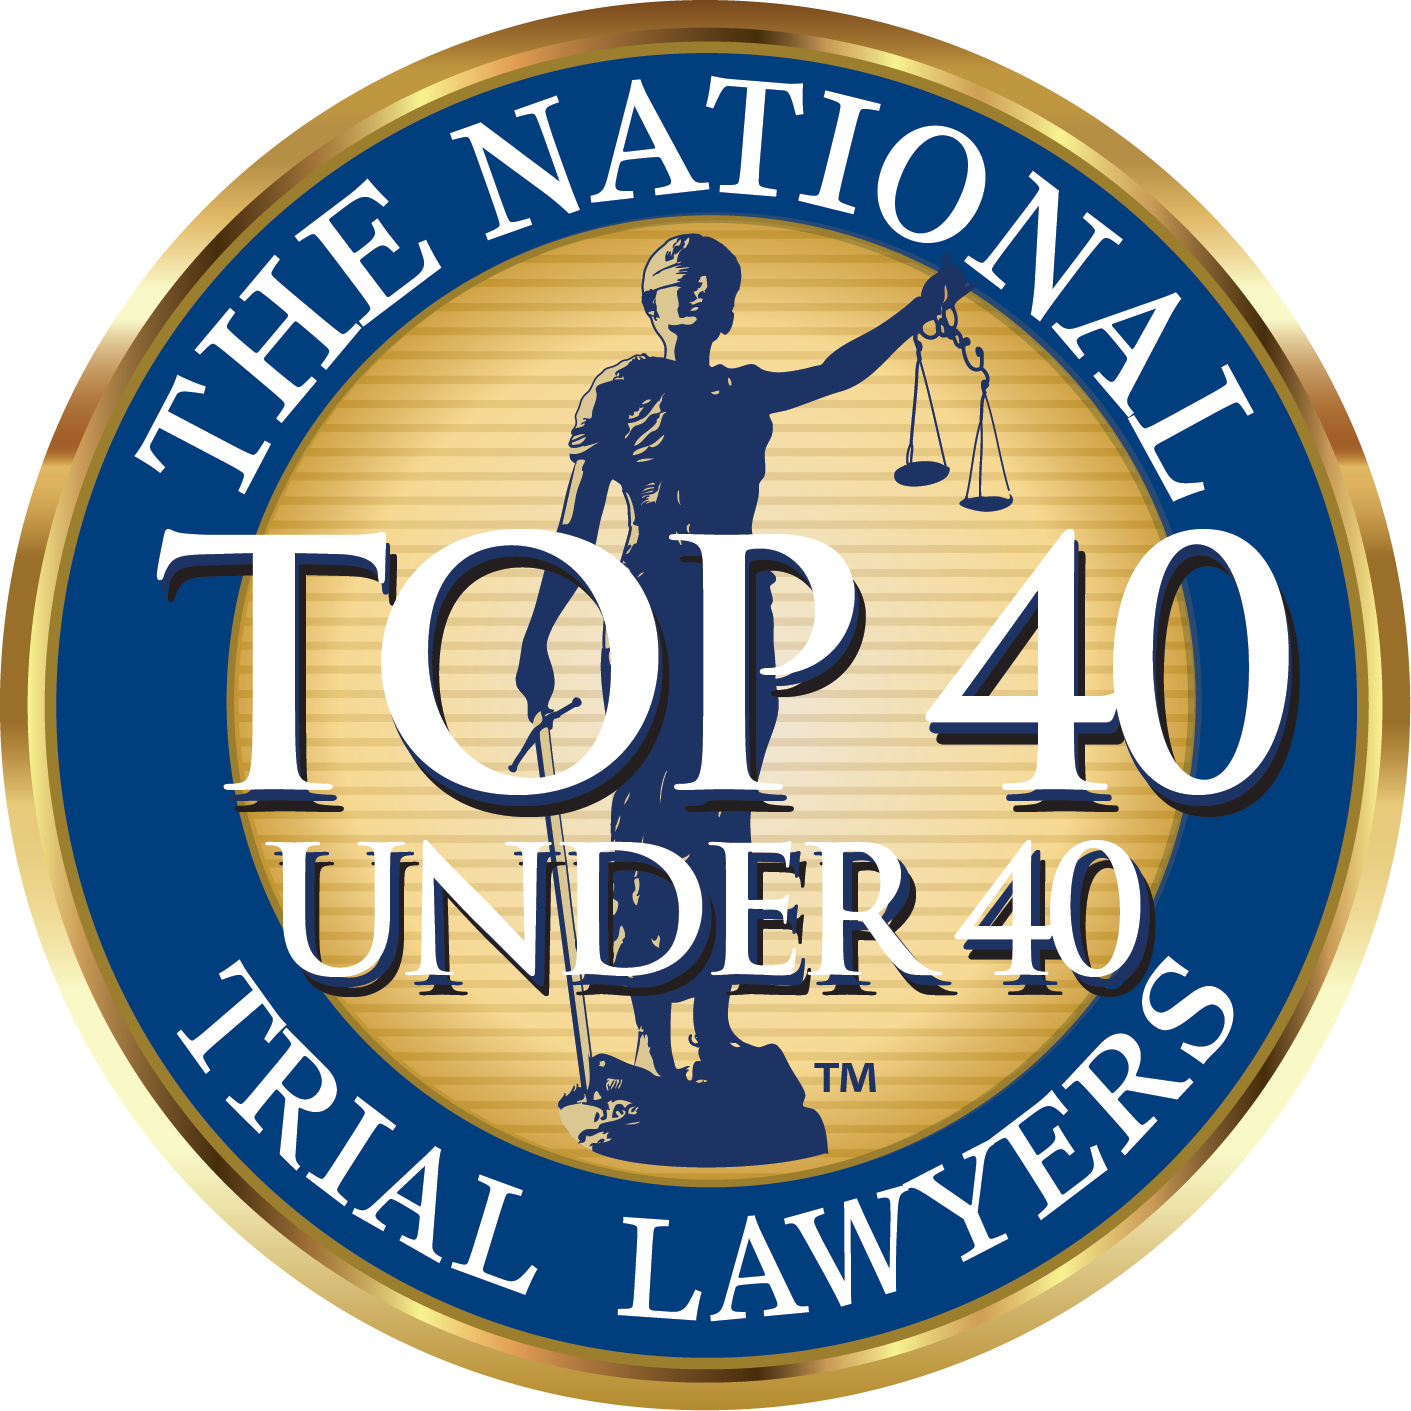 The National Trial Lawyers Top 40 Under 40 Award